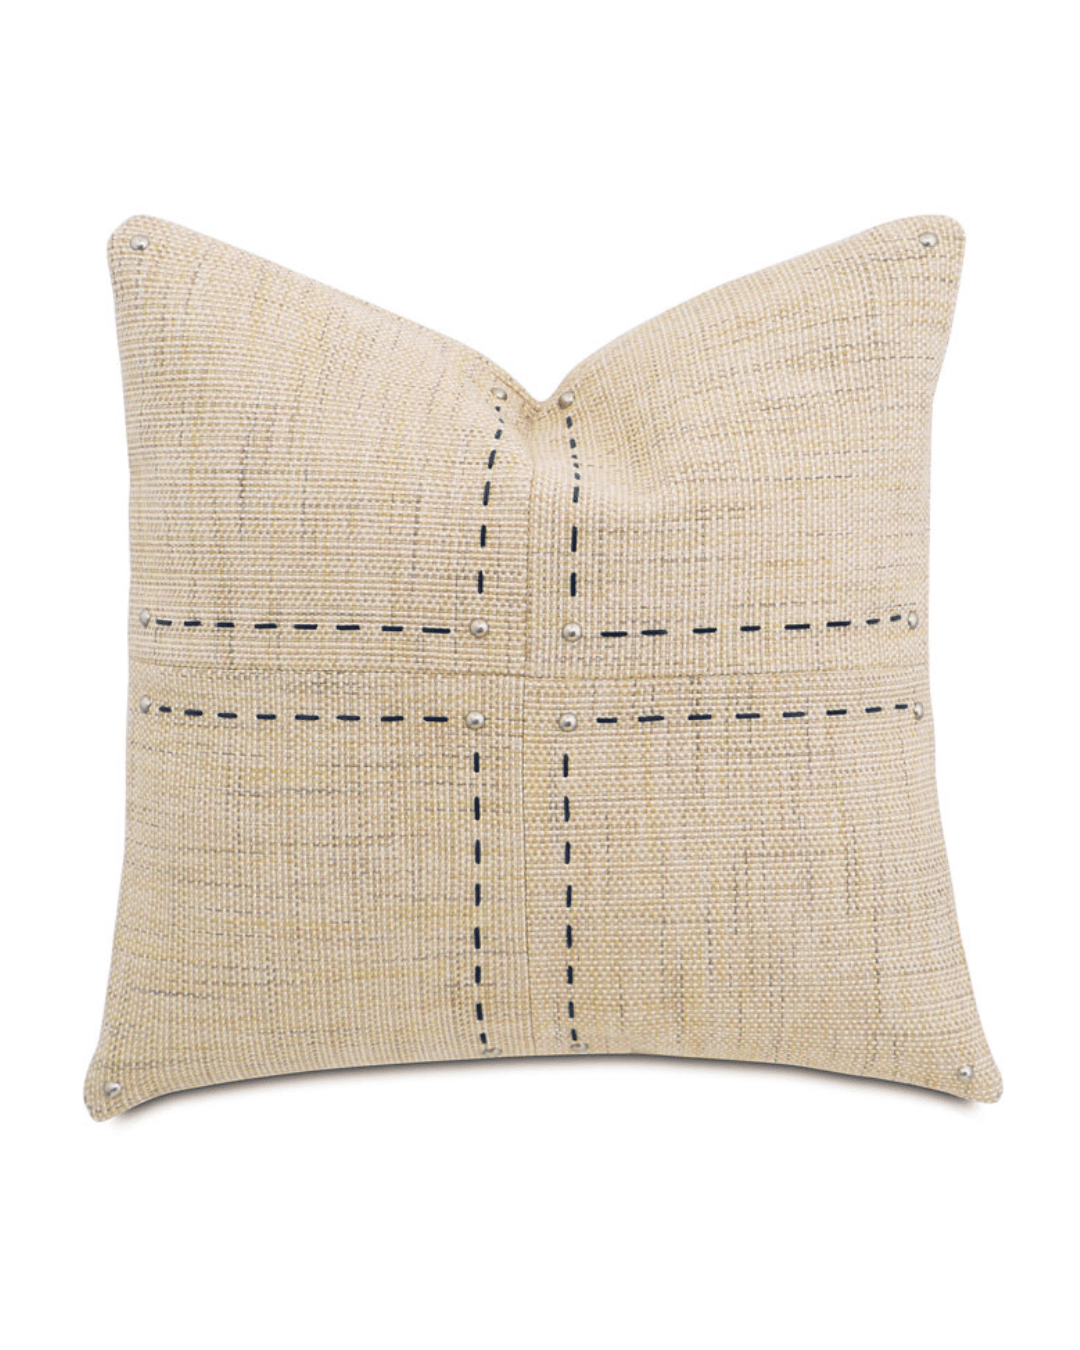 A square beige Mer Brulee Handstich pillow with a stitched black line pattern creating a large X across its surface in Eastern Accents style, isolated on a white background.